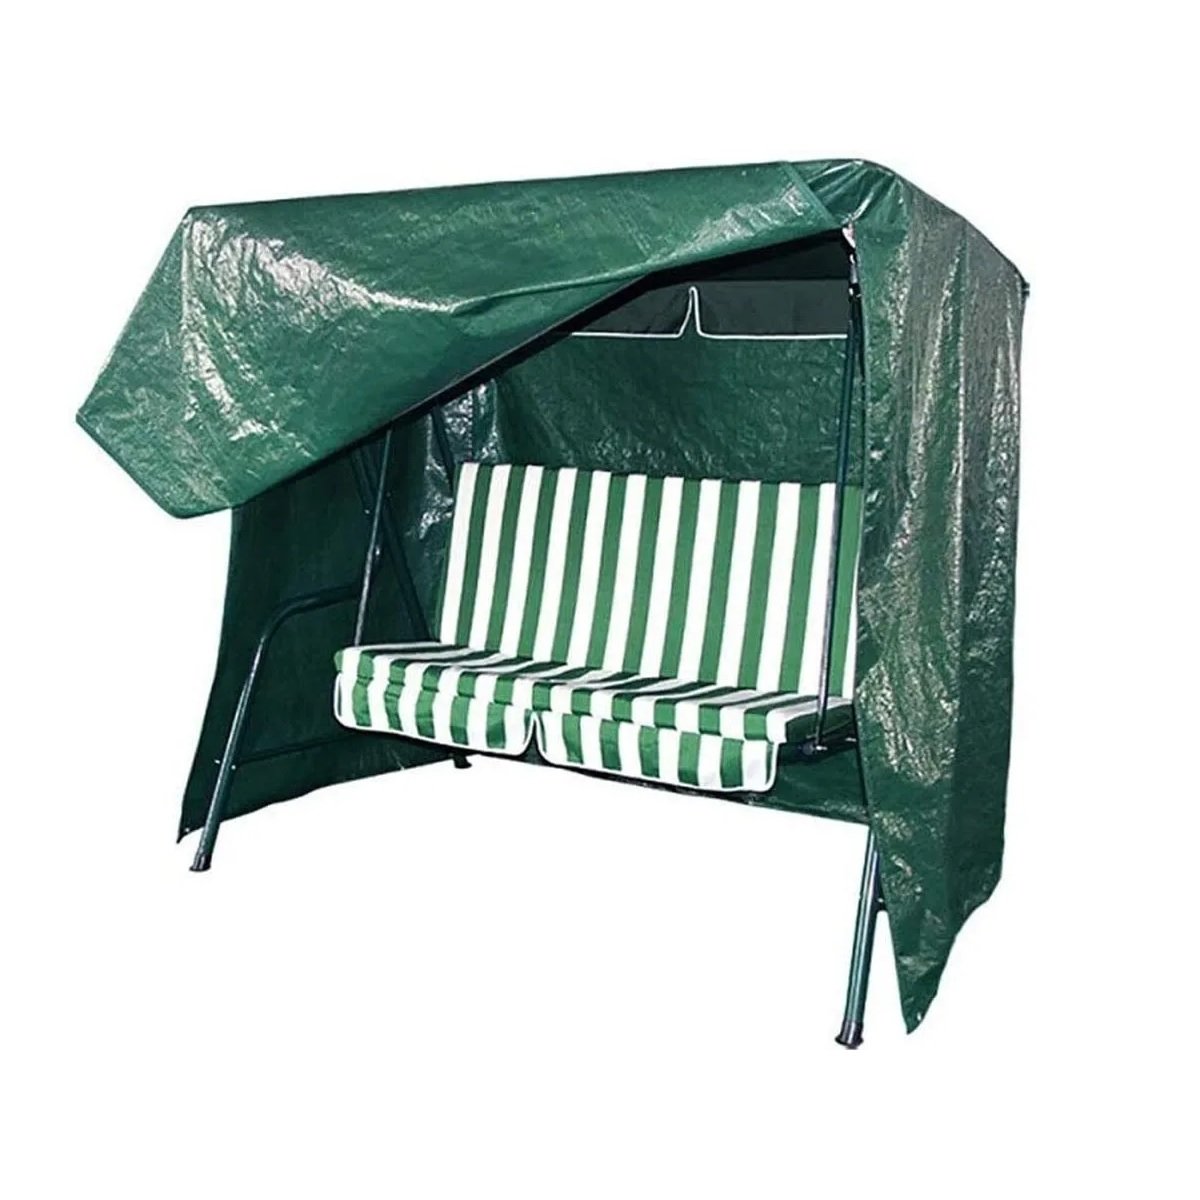 Waterproof 7ft 2.1m Garden Furniture 3 Seater Swing Bench Seat Cover - Click Image to Close